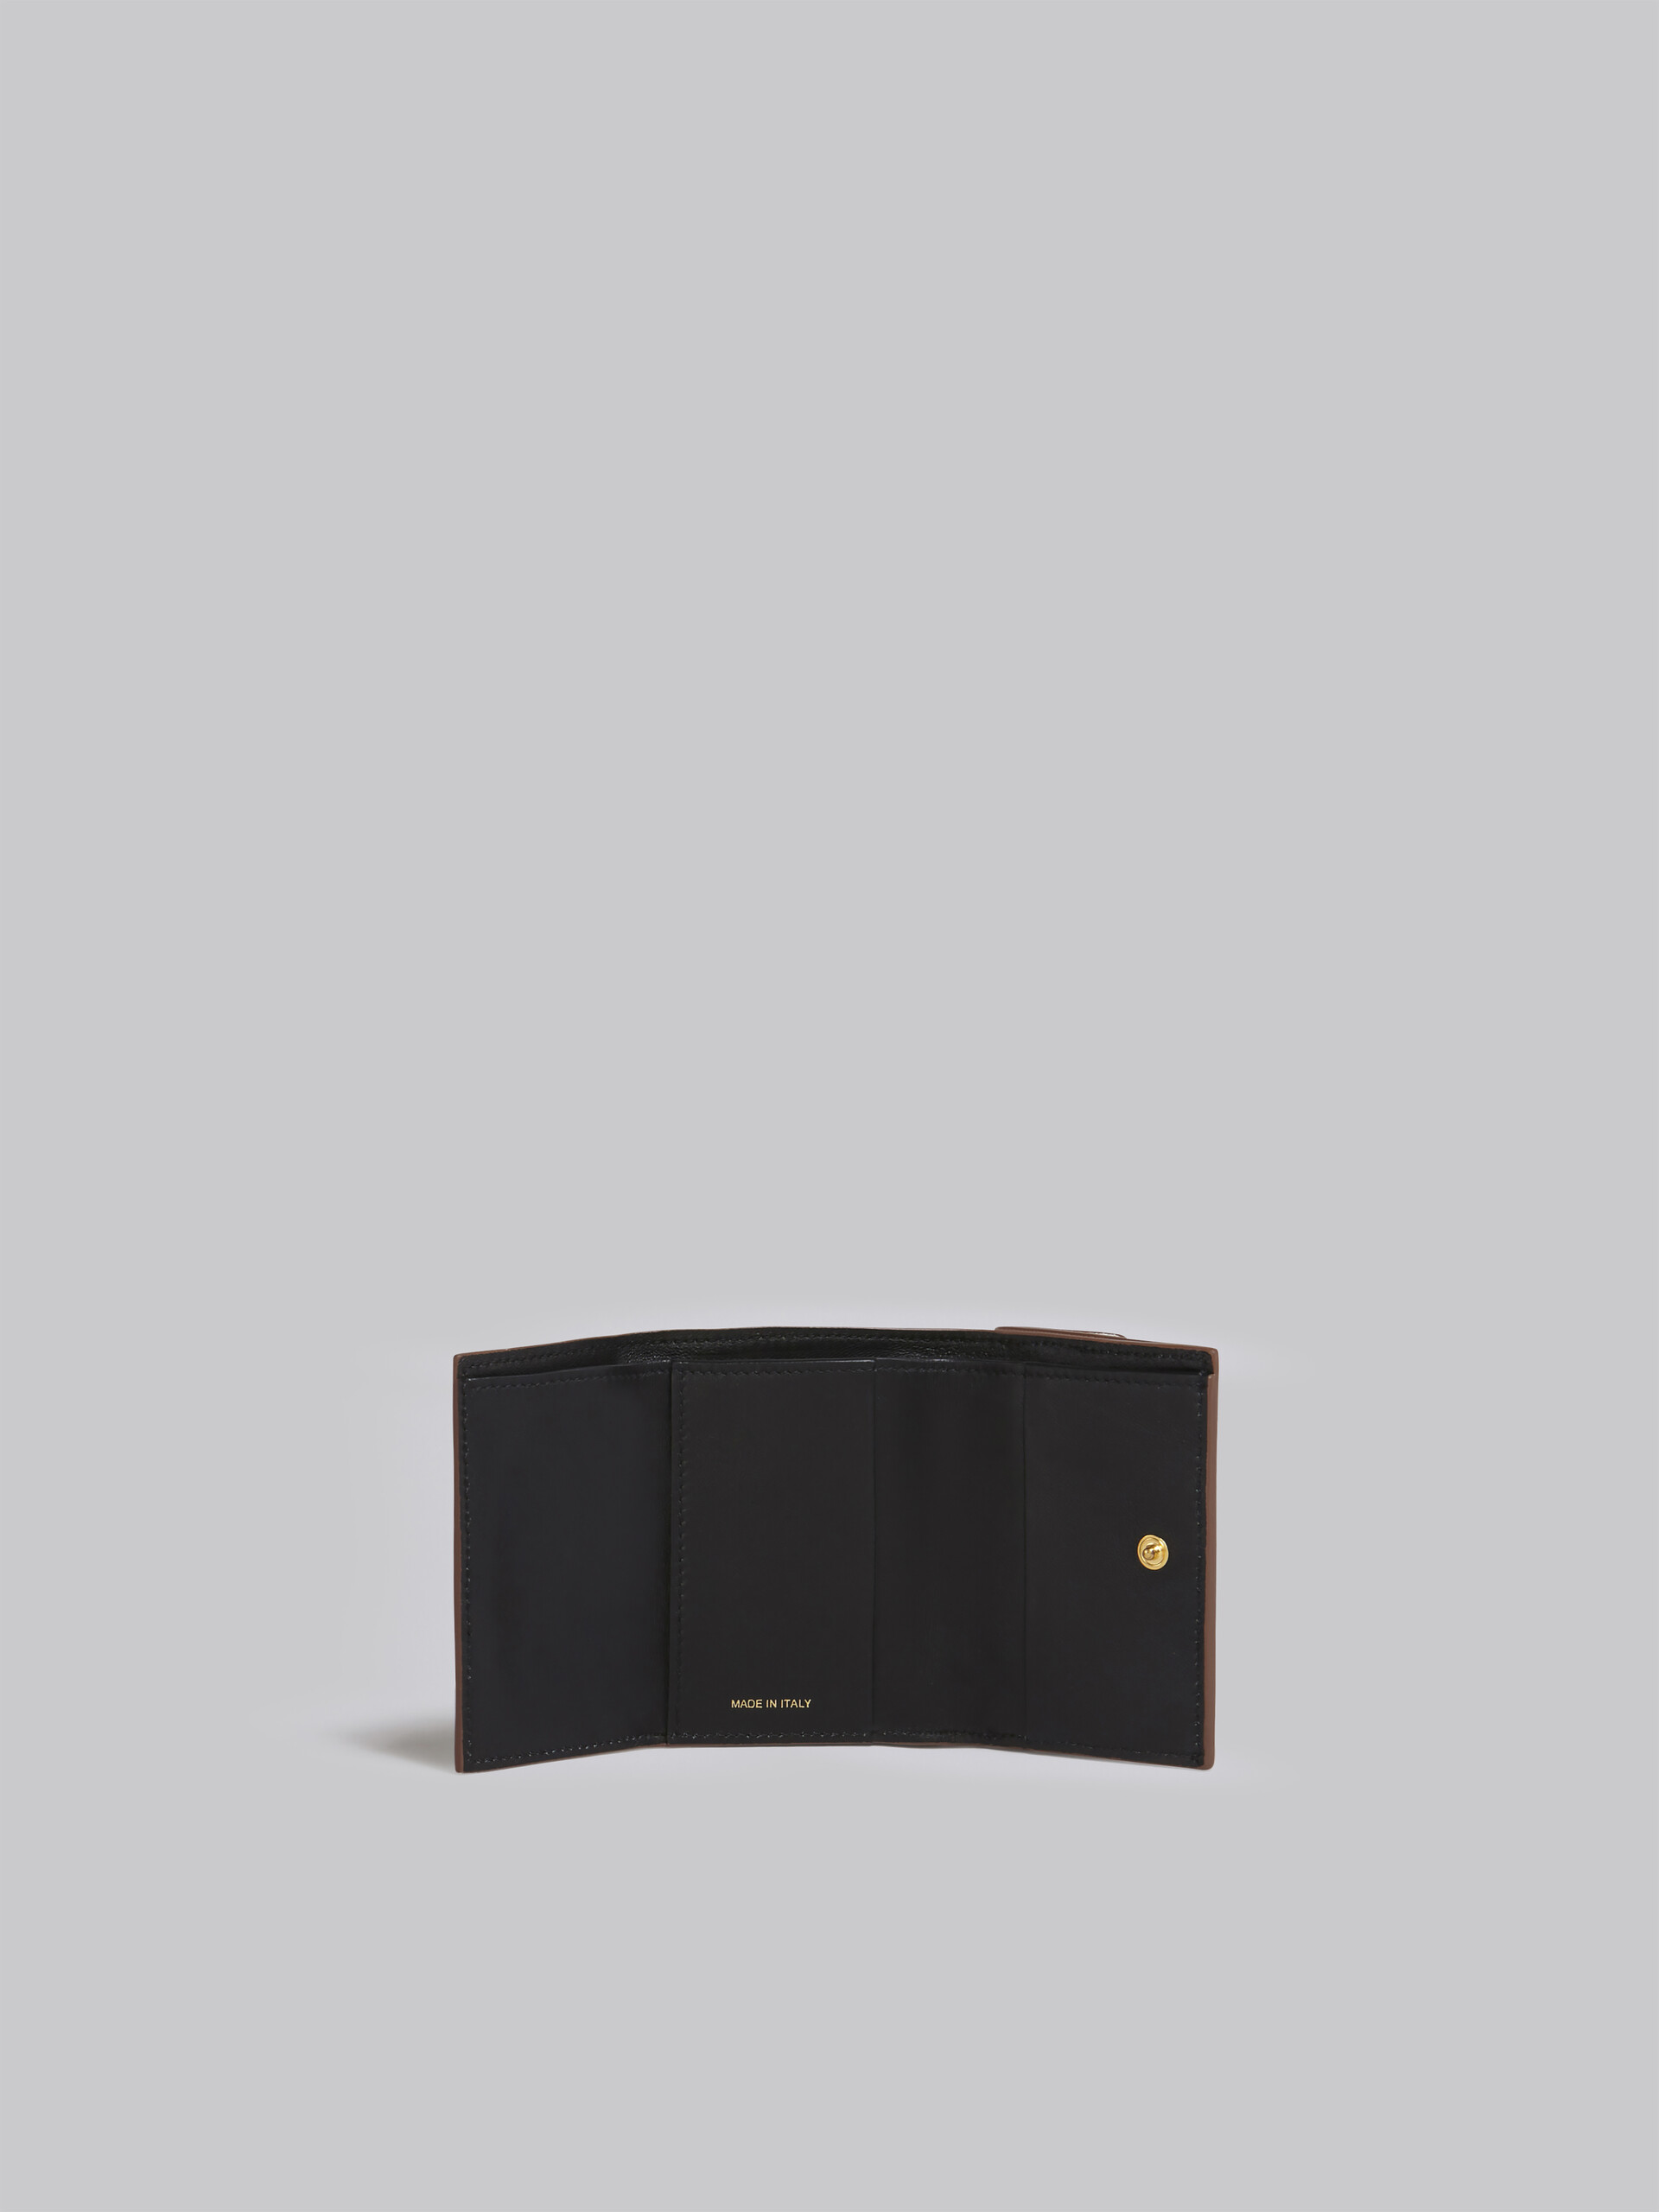 Tri-fold wallet in mono-coloured saffiano leather - Wallets - Image 2